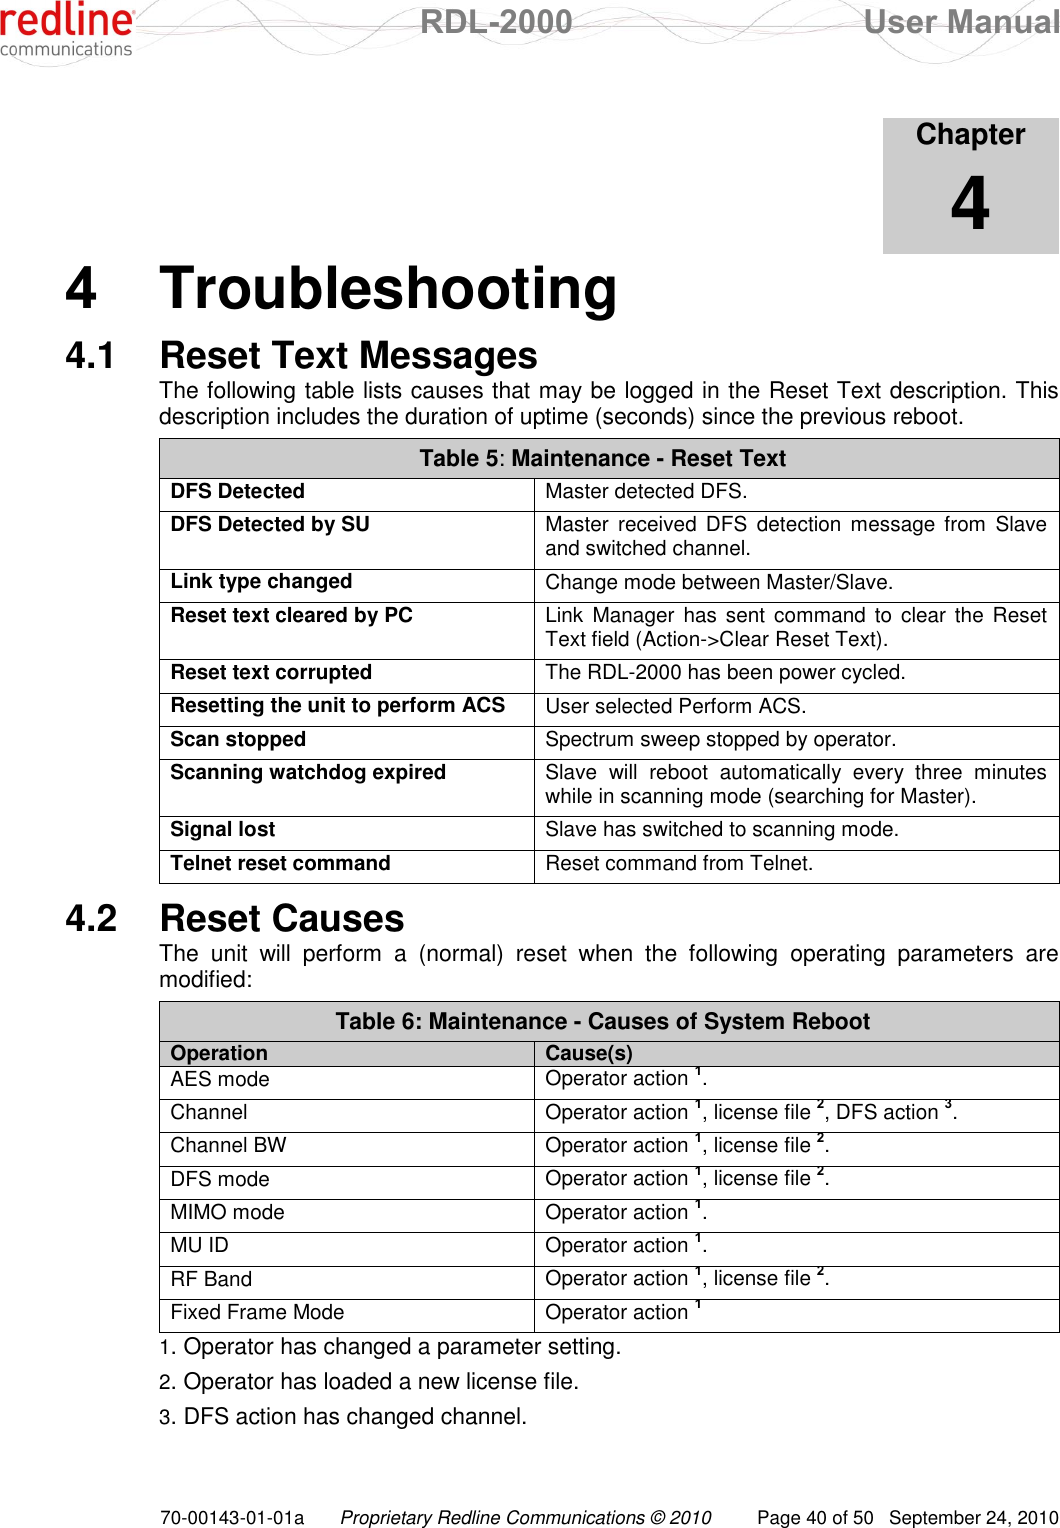  RDL-2000  User Manual 70-00143-01-01a Proprietary Redline Communications © 2010  Page 40 of 50  September 24, 2010            Chapter 4 4  Troubleshooting 4.1  Reset Text Messages The following table lists causes that may be logged in the Reset Text description. This description includes the duration of uptime (seconds) since the previous reboot. Table 5: Maintenance - Reset Text DFS Detected  Master detected DFS.  DFS Detected by SU  Master  received  DFS  detection  message  from  Slave and switched channel. Link type changed   Change mode between Master/Slave. Reset text cleared by PC Link  Manager has  sent command  to clear  the Reset Text field (Action-&gt;Clear Reset Text). Reset text corrupted  The RDL-2000 has been power cycled. Resetting the unit to perform ACS  User selected Perform ACS. Scan stopped  Spectrum sweep stopped by operator. Scanning watchdog expired  Slave  will  reboot  automatically  every  three  minutes while in scanning mode (searching for Master). Signal lost  Slave has switched to scanning mode. Telnet reset command  Reset command from Telnet. 4.2  Reset Causes The  unit  will  perform  a  (normal)  reset  when  the  following  operating  parameters  are modified: Table 6: Maintenance - Causes of System Reboot Operation Cause(s) AES mode Operator action 1. Channel Operator action 1, license file 2, DFS action 3. Channel BW Operator action 1, license file 2. DFS mode Operator action 1, license file 2. MIMO mode Operator action 1. MU ID Operator action 1. RF Band Operator action 1, license file 2. Fixed Frame Mode Operator action 1 1. Operator has changed a parameter setting.  2. Operator has loaded a new license file.  3. DFS action has changed channel. 